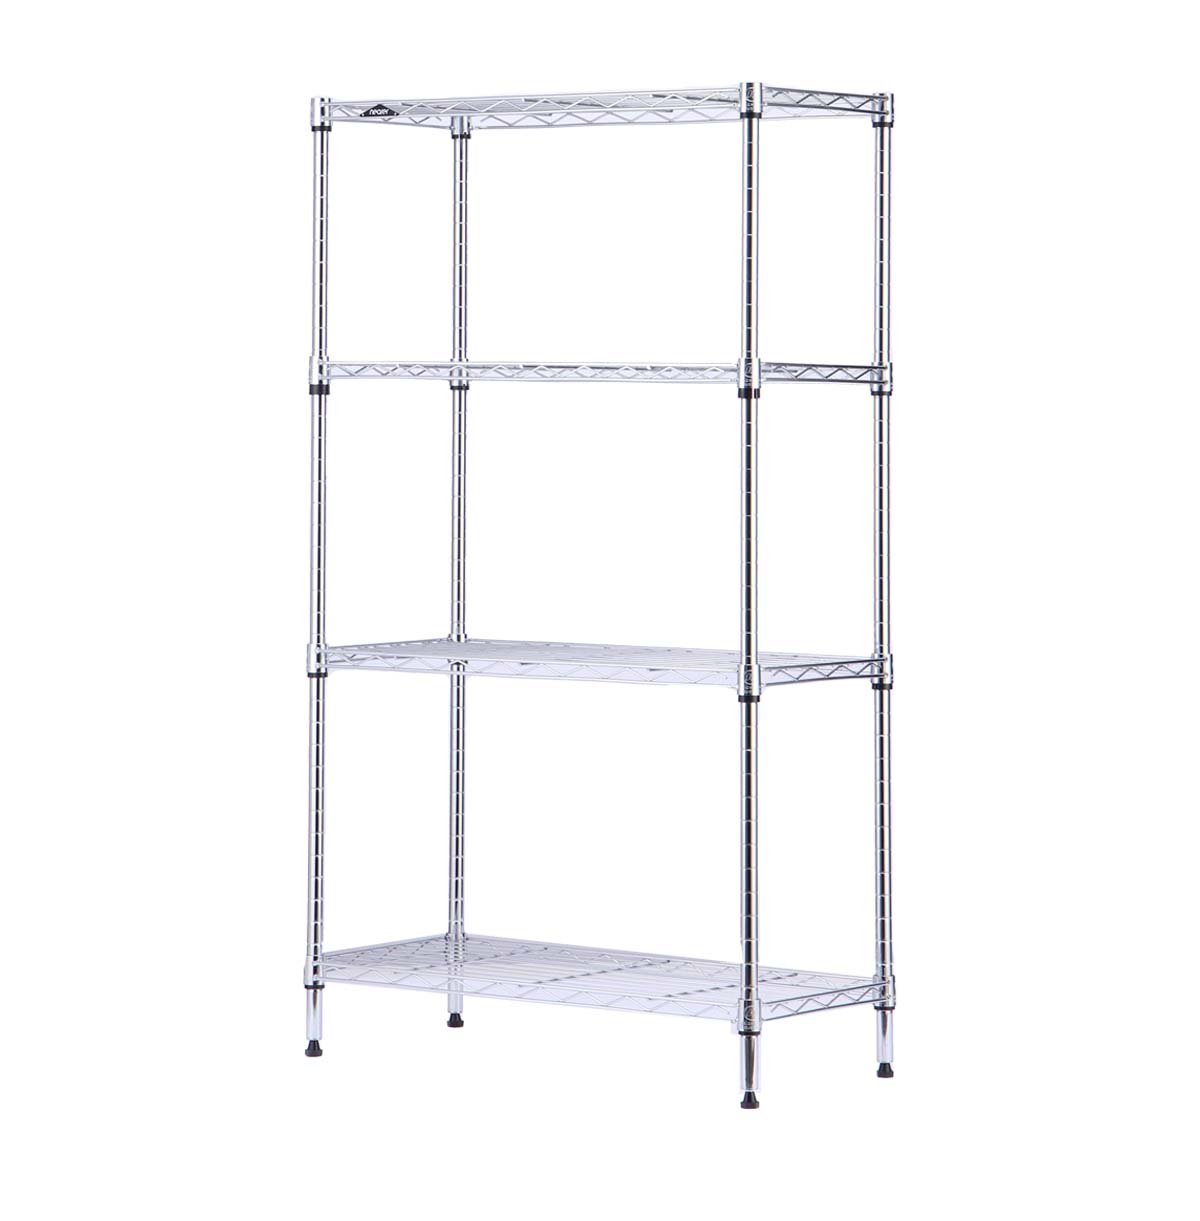 4 tier wire shelving unit Solution